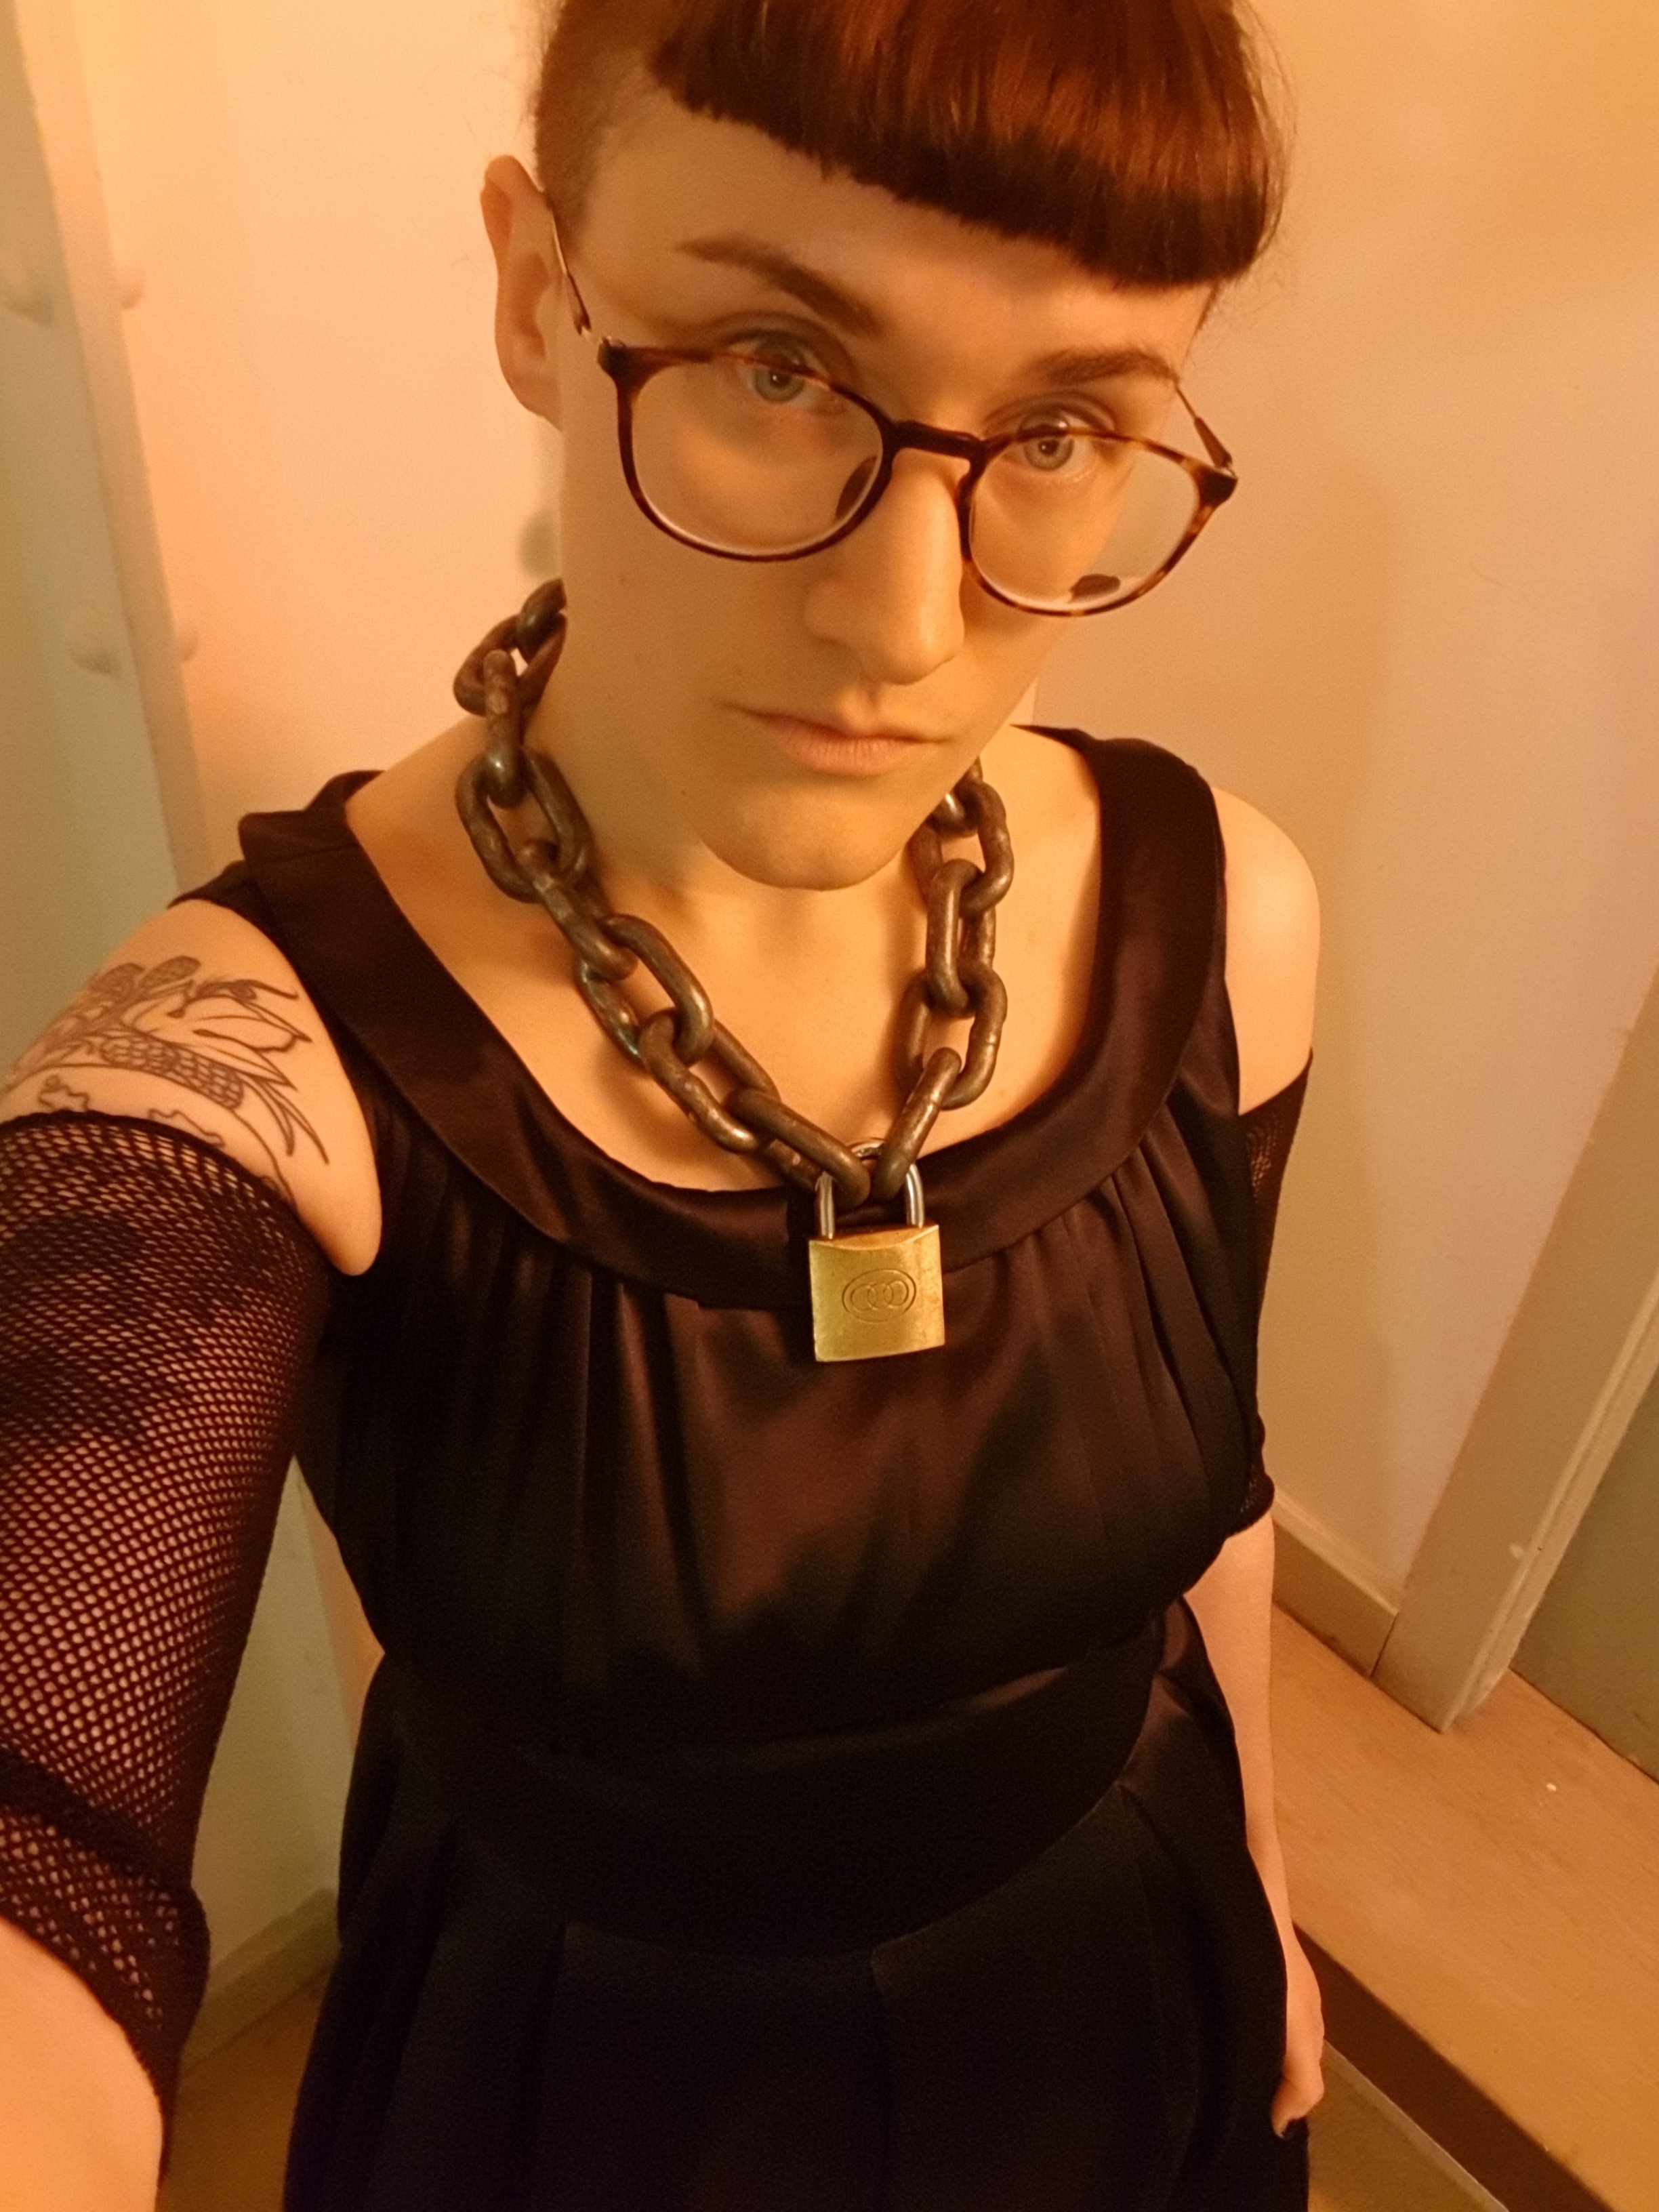 A hedonistic, polyamorous, bisexual witch ~ Pro Switch, Fetish Porn, Smut peddler ~ Sex positive, BDSM, General Sluttery 🌈 
My hypno-kink at: @HypnoHedonist